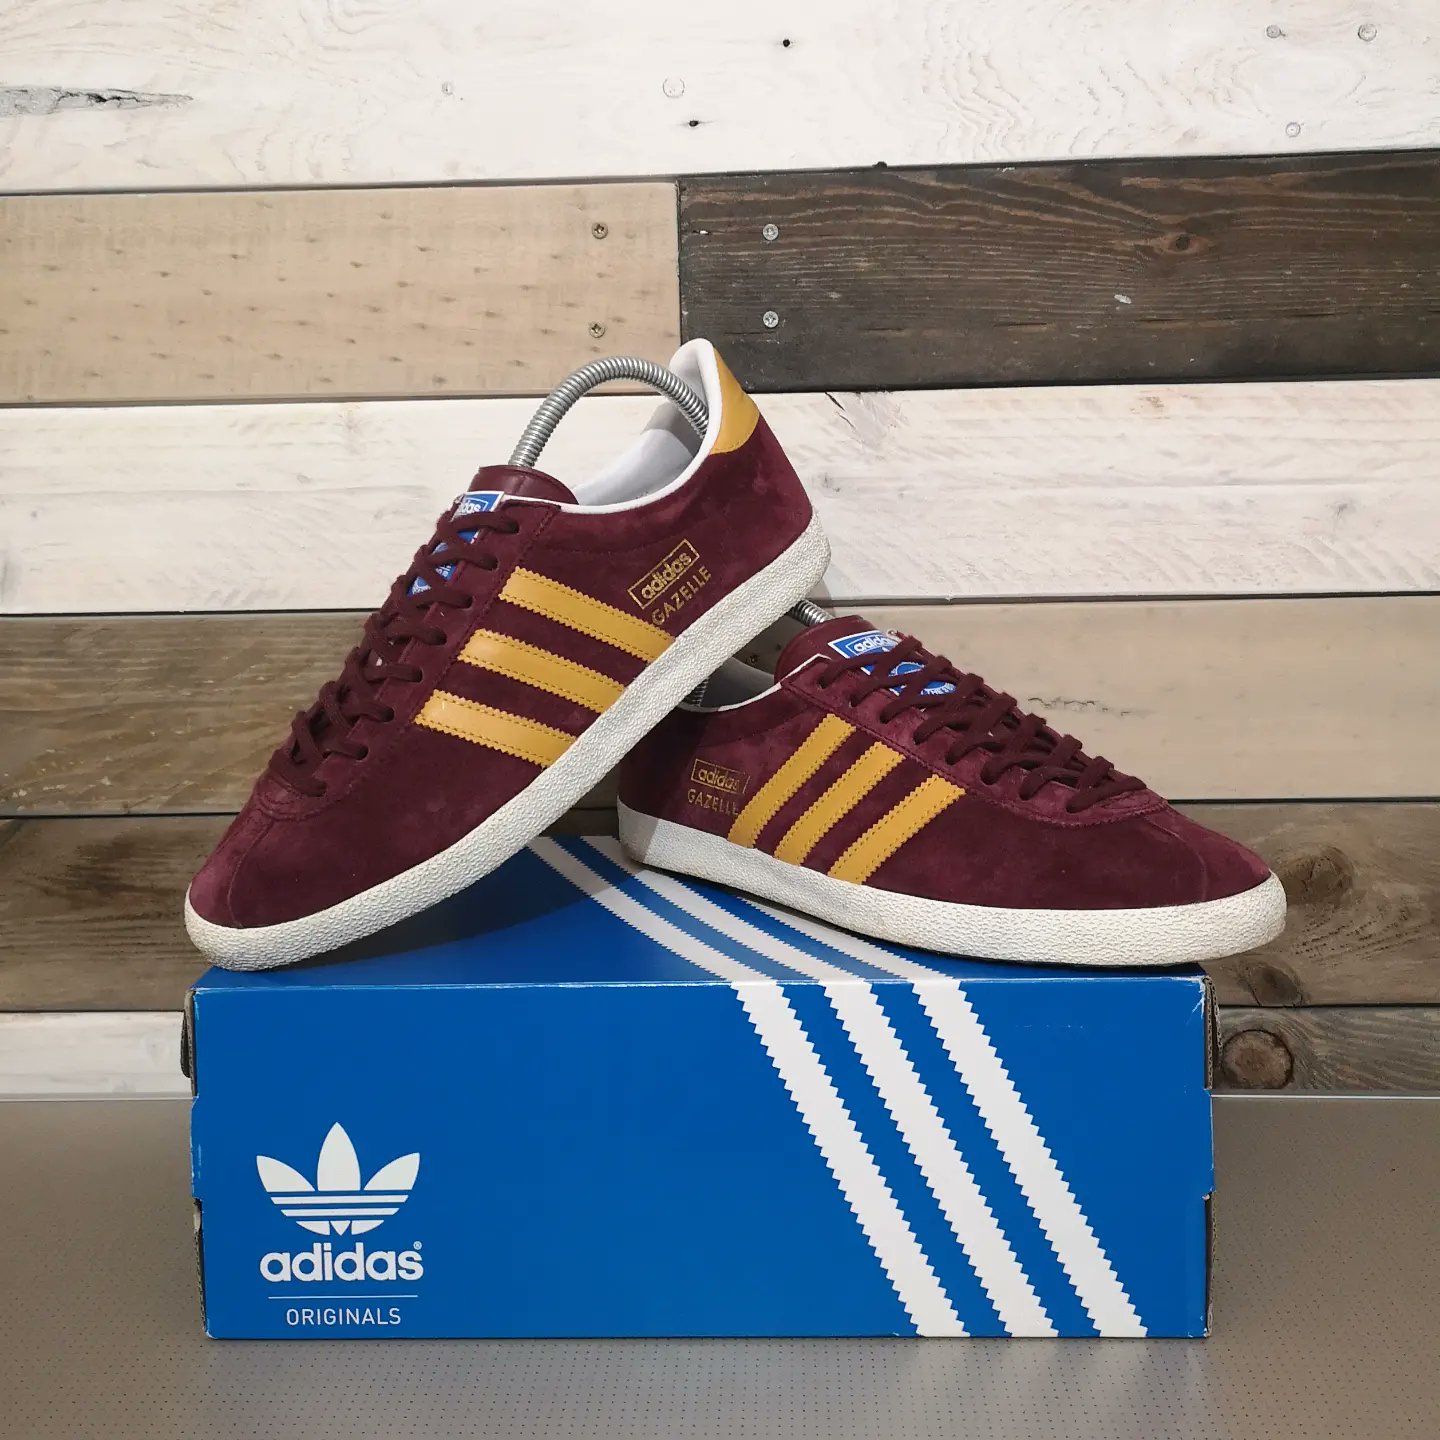 TheClobberDen on Twitter: "FOR SALE Gazelle OG Size 8 • Price - £32 • No Box • Released 04/2013 • Product Code - G96697 • Light Maroon / Metallic Gold https://t.co/QkamG121ef" / Twitter